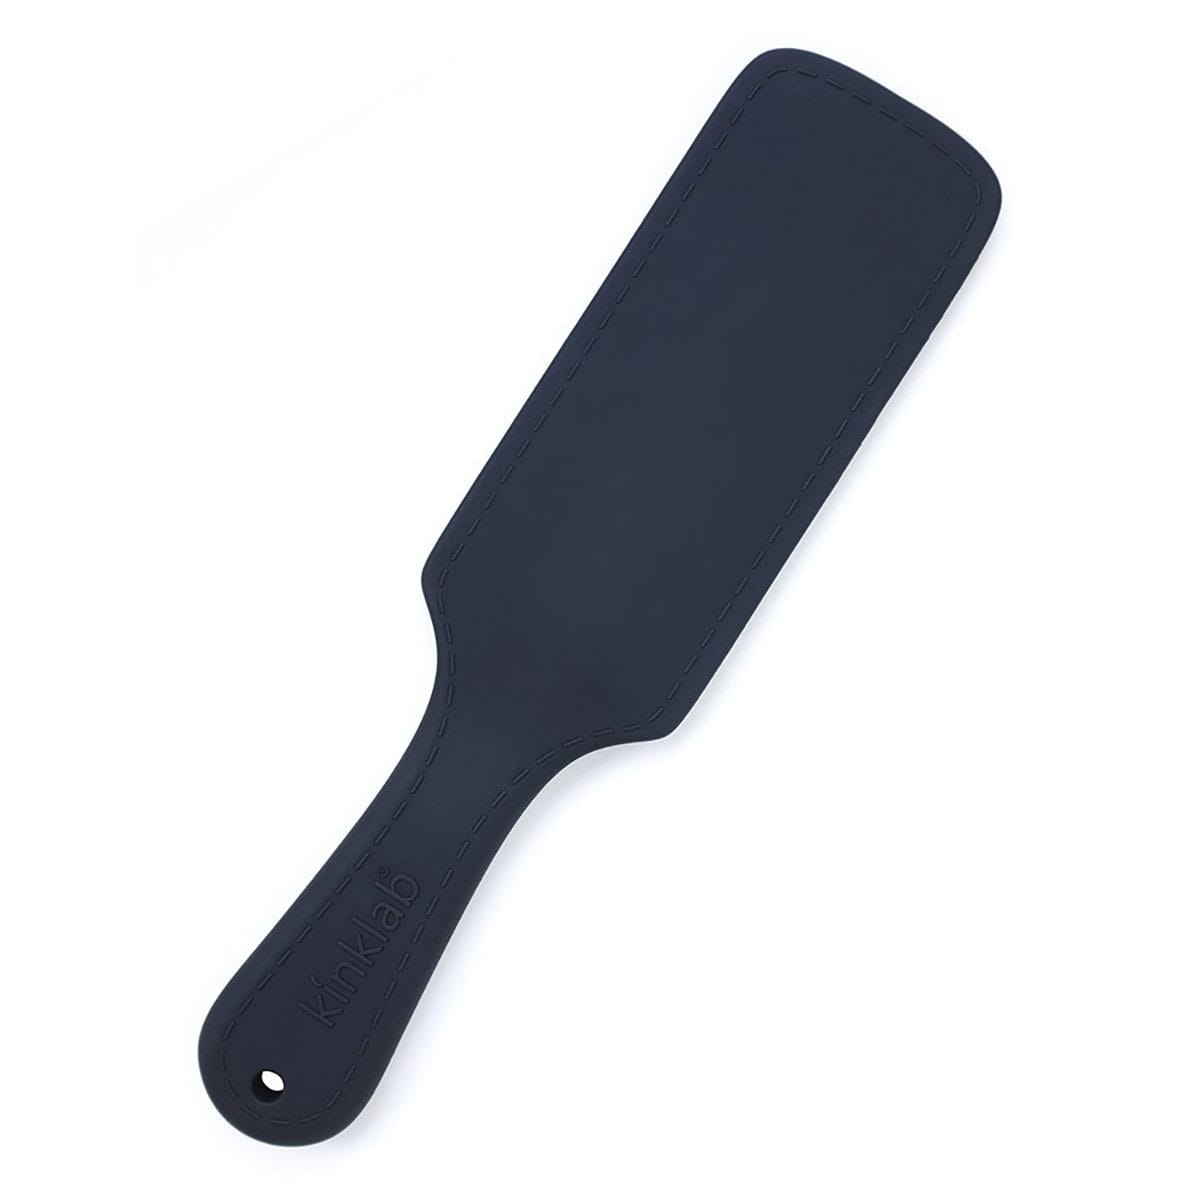 Thunderclap Paddle electro stimulators are sometimes on sale at herVibrators.com for couples and solo-play when you sign up for an account and access member's only savings.